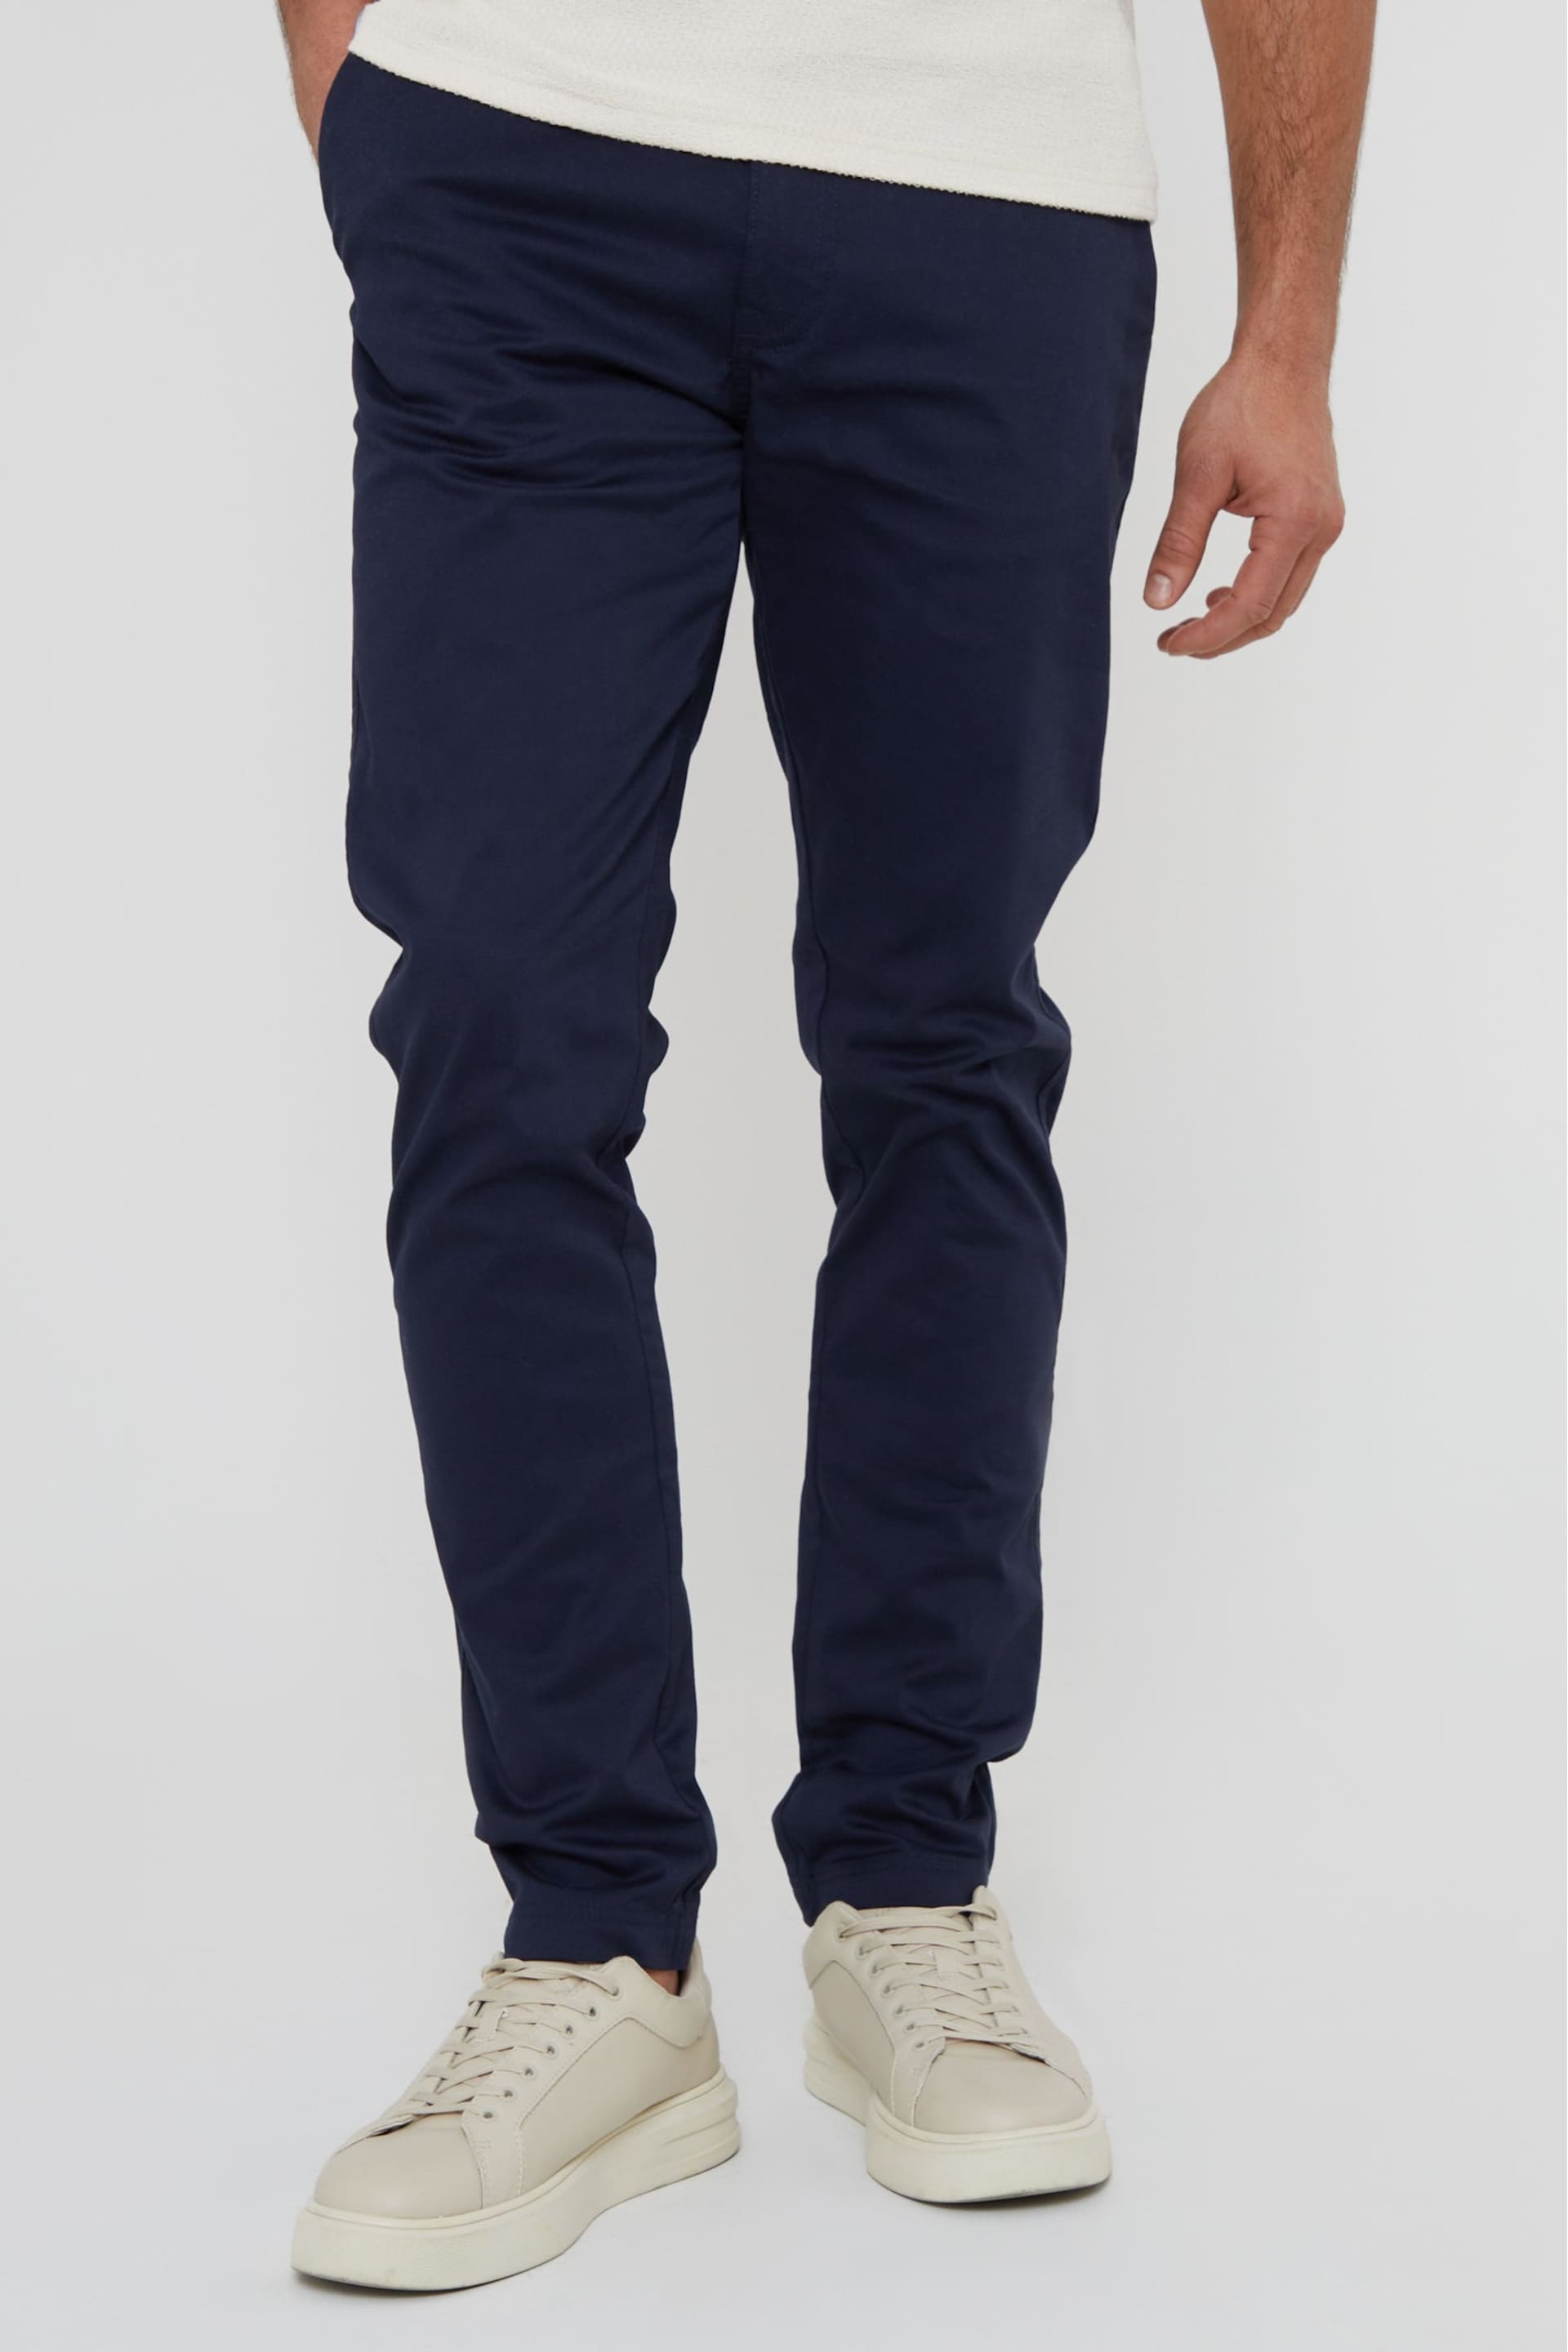 Threadbare Navy Cotton Slim Fit Chino Trousers With Stretch - Image 1 of 4